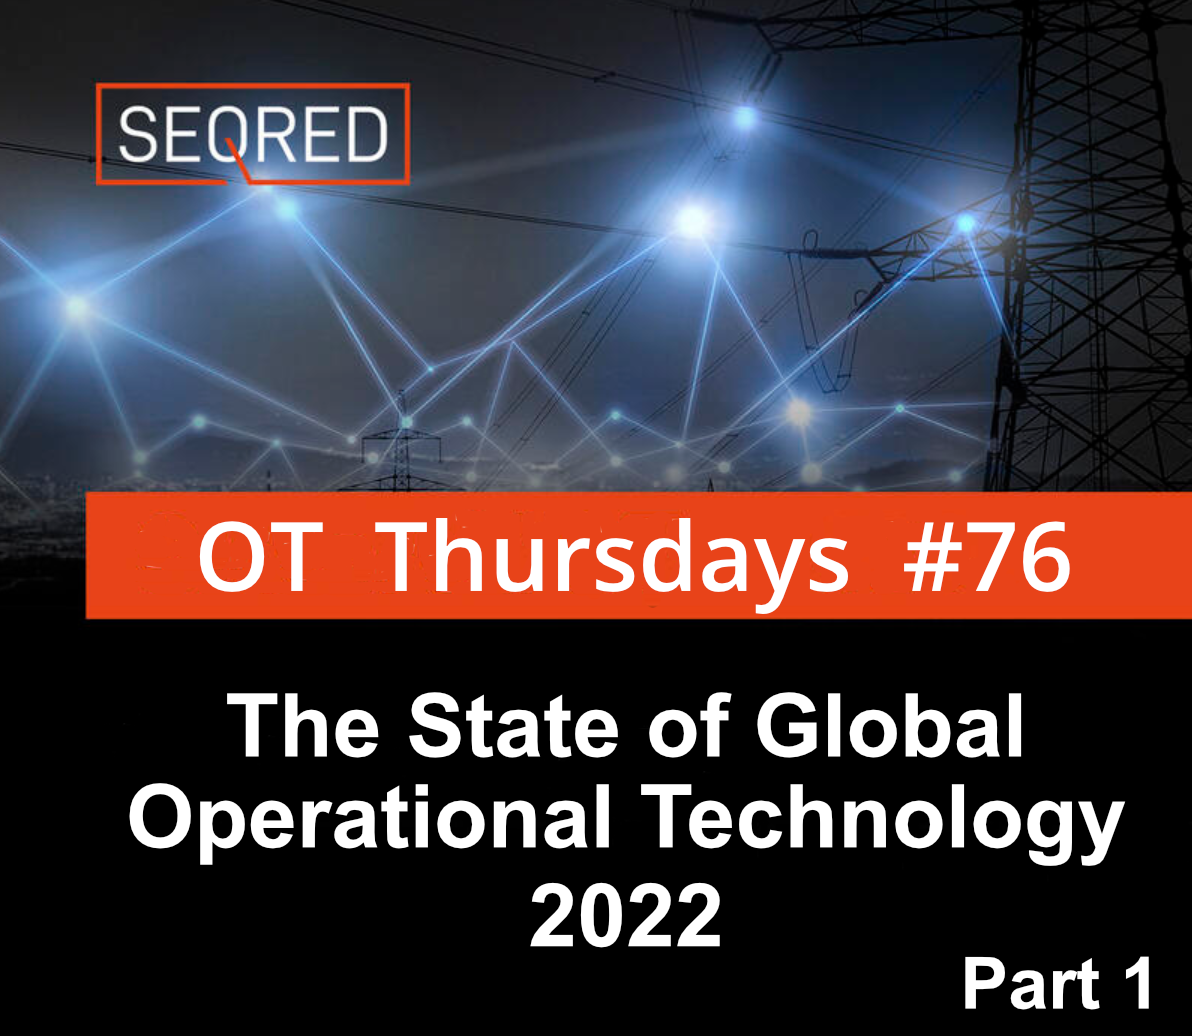 The State of Global Operational Technology